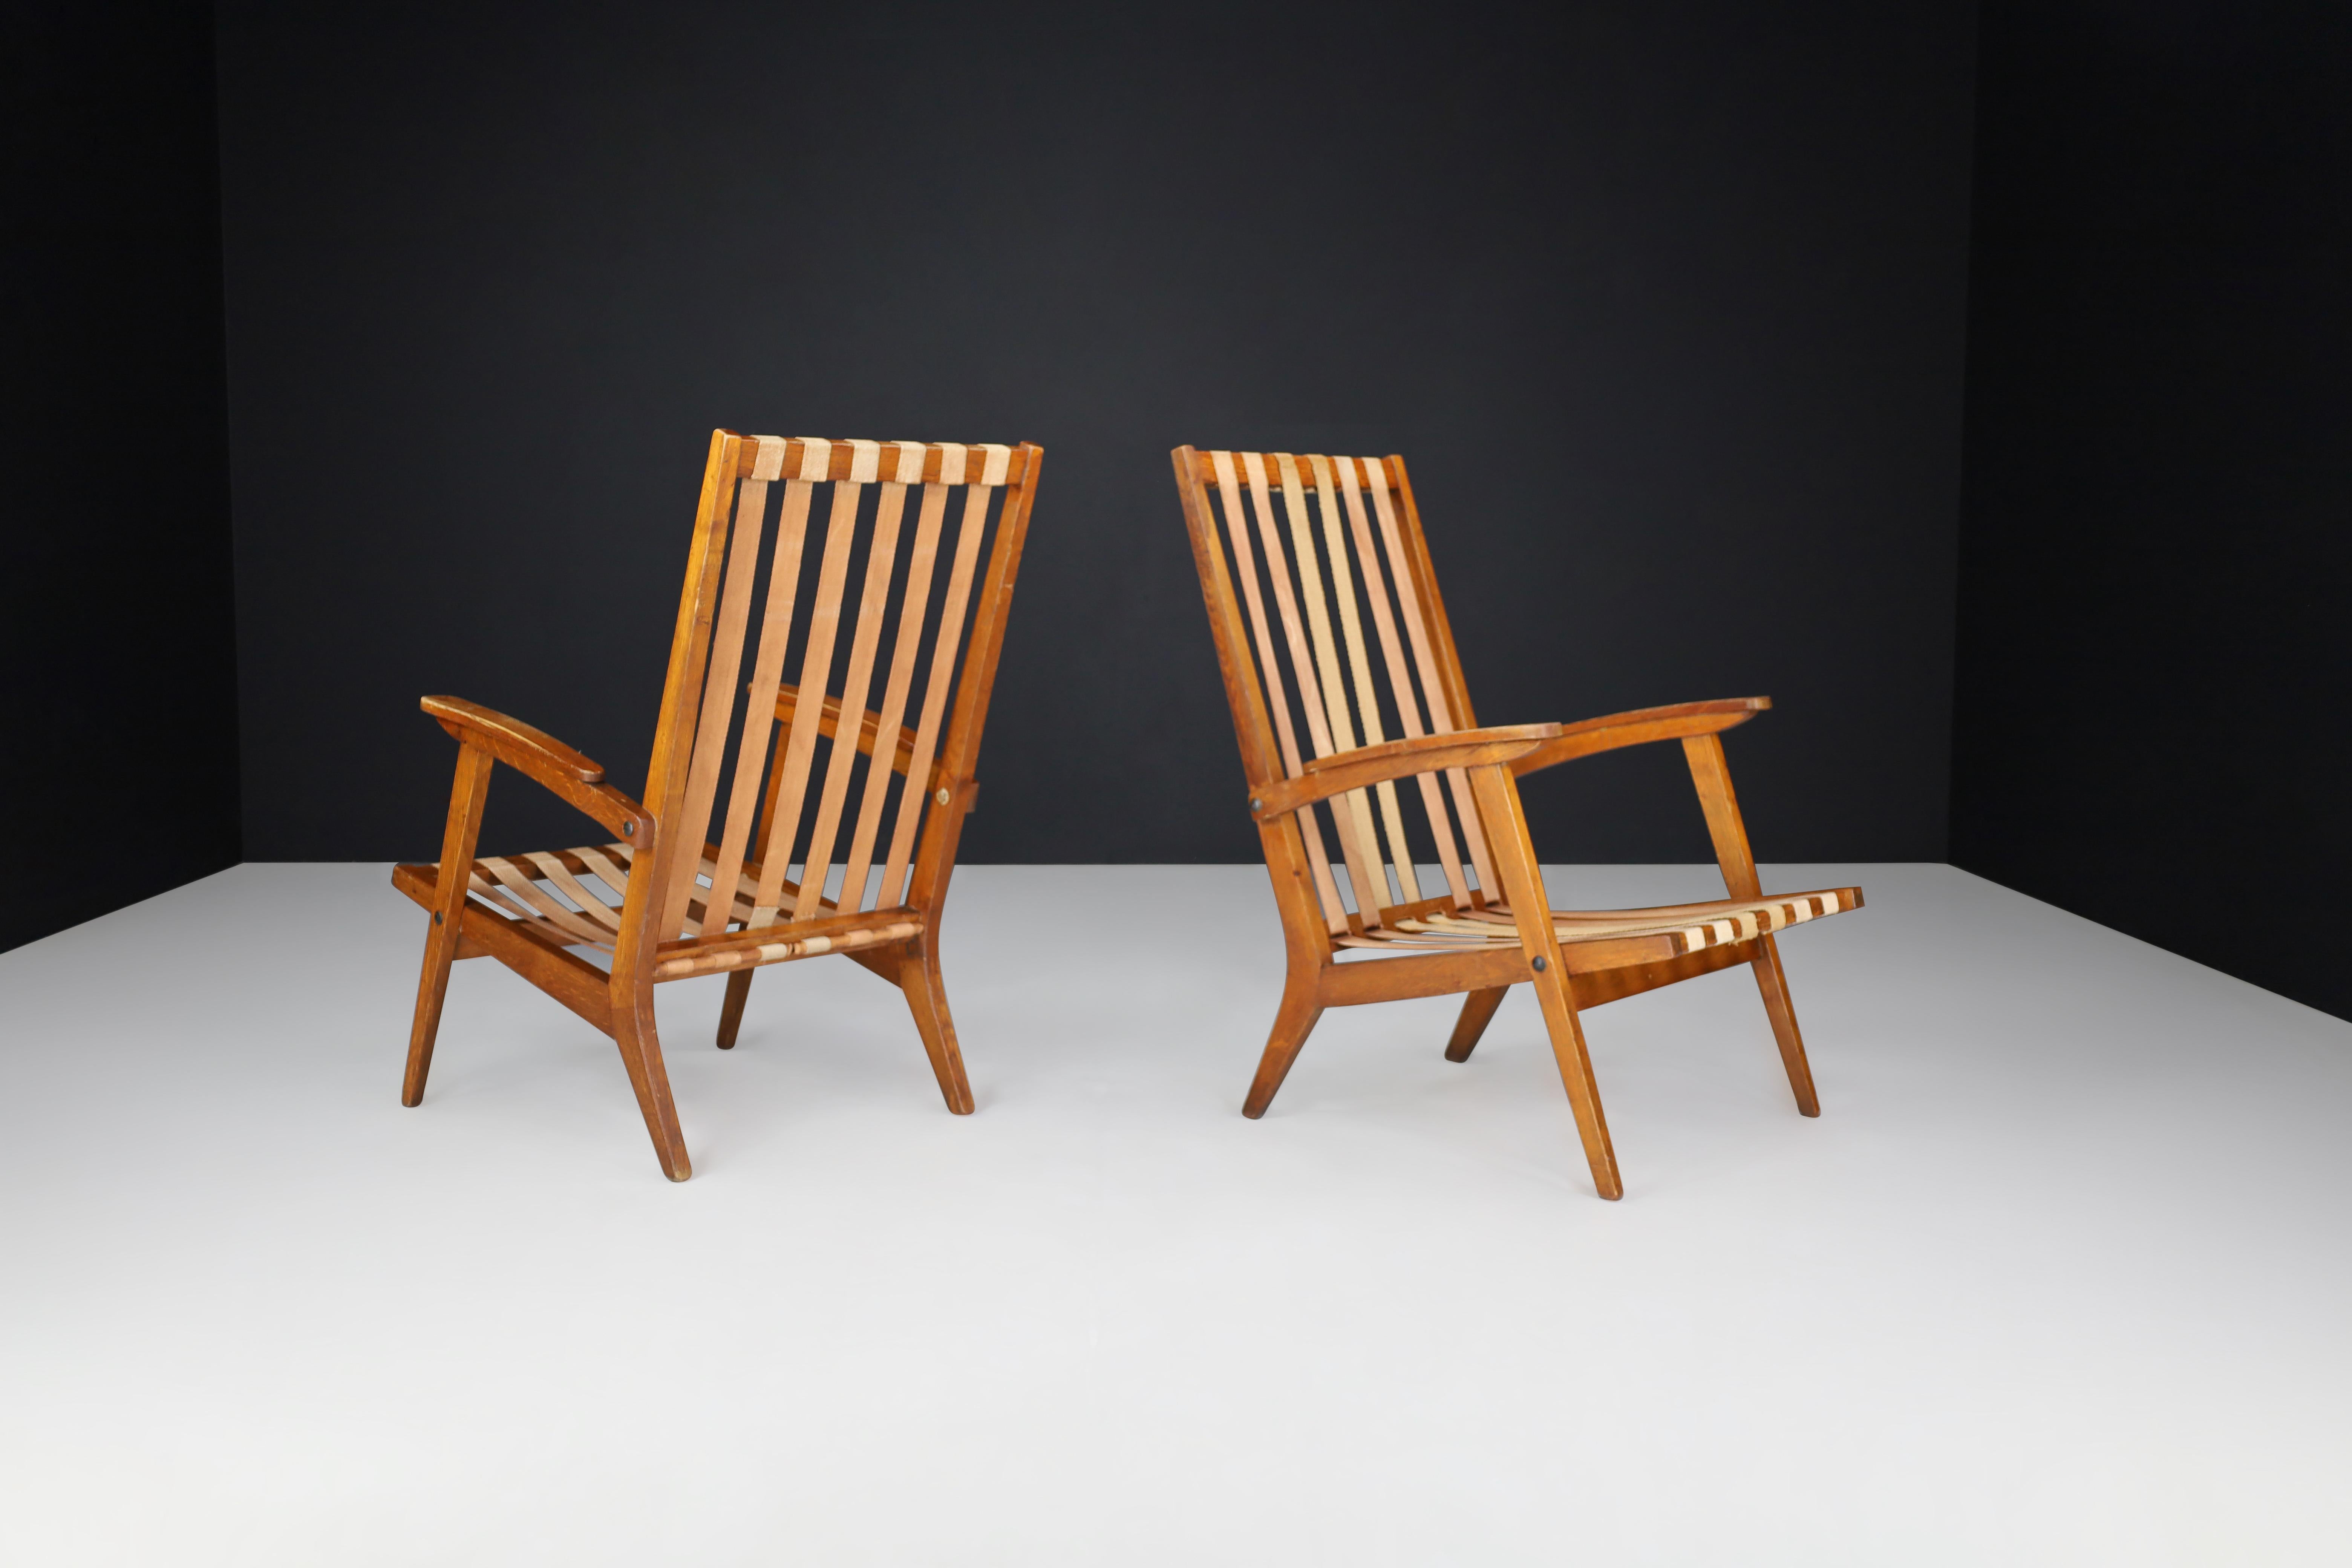 French Oak Sculptural Lounge Chairs with Brown Upholstery, France, 1950s For Sale